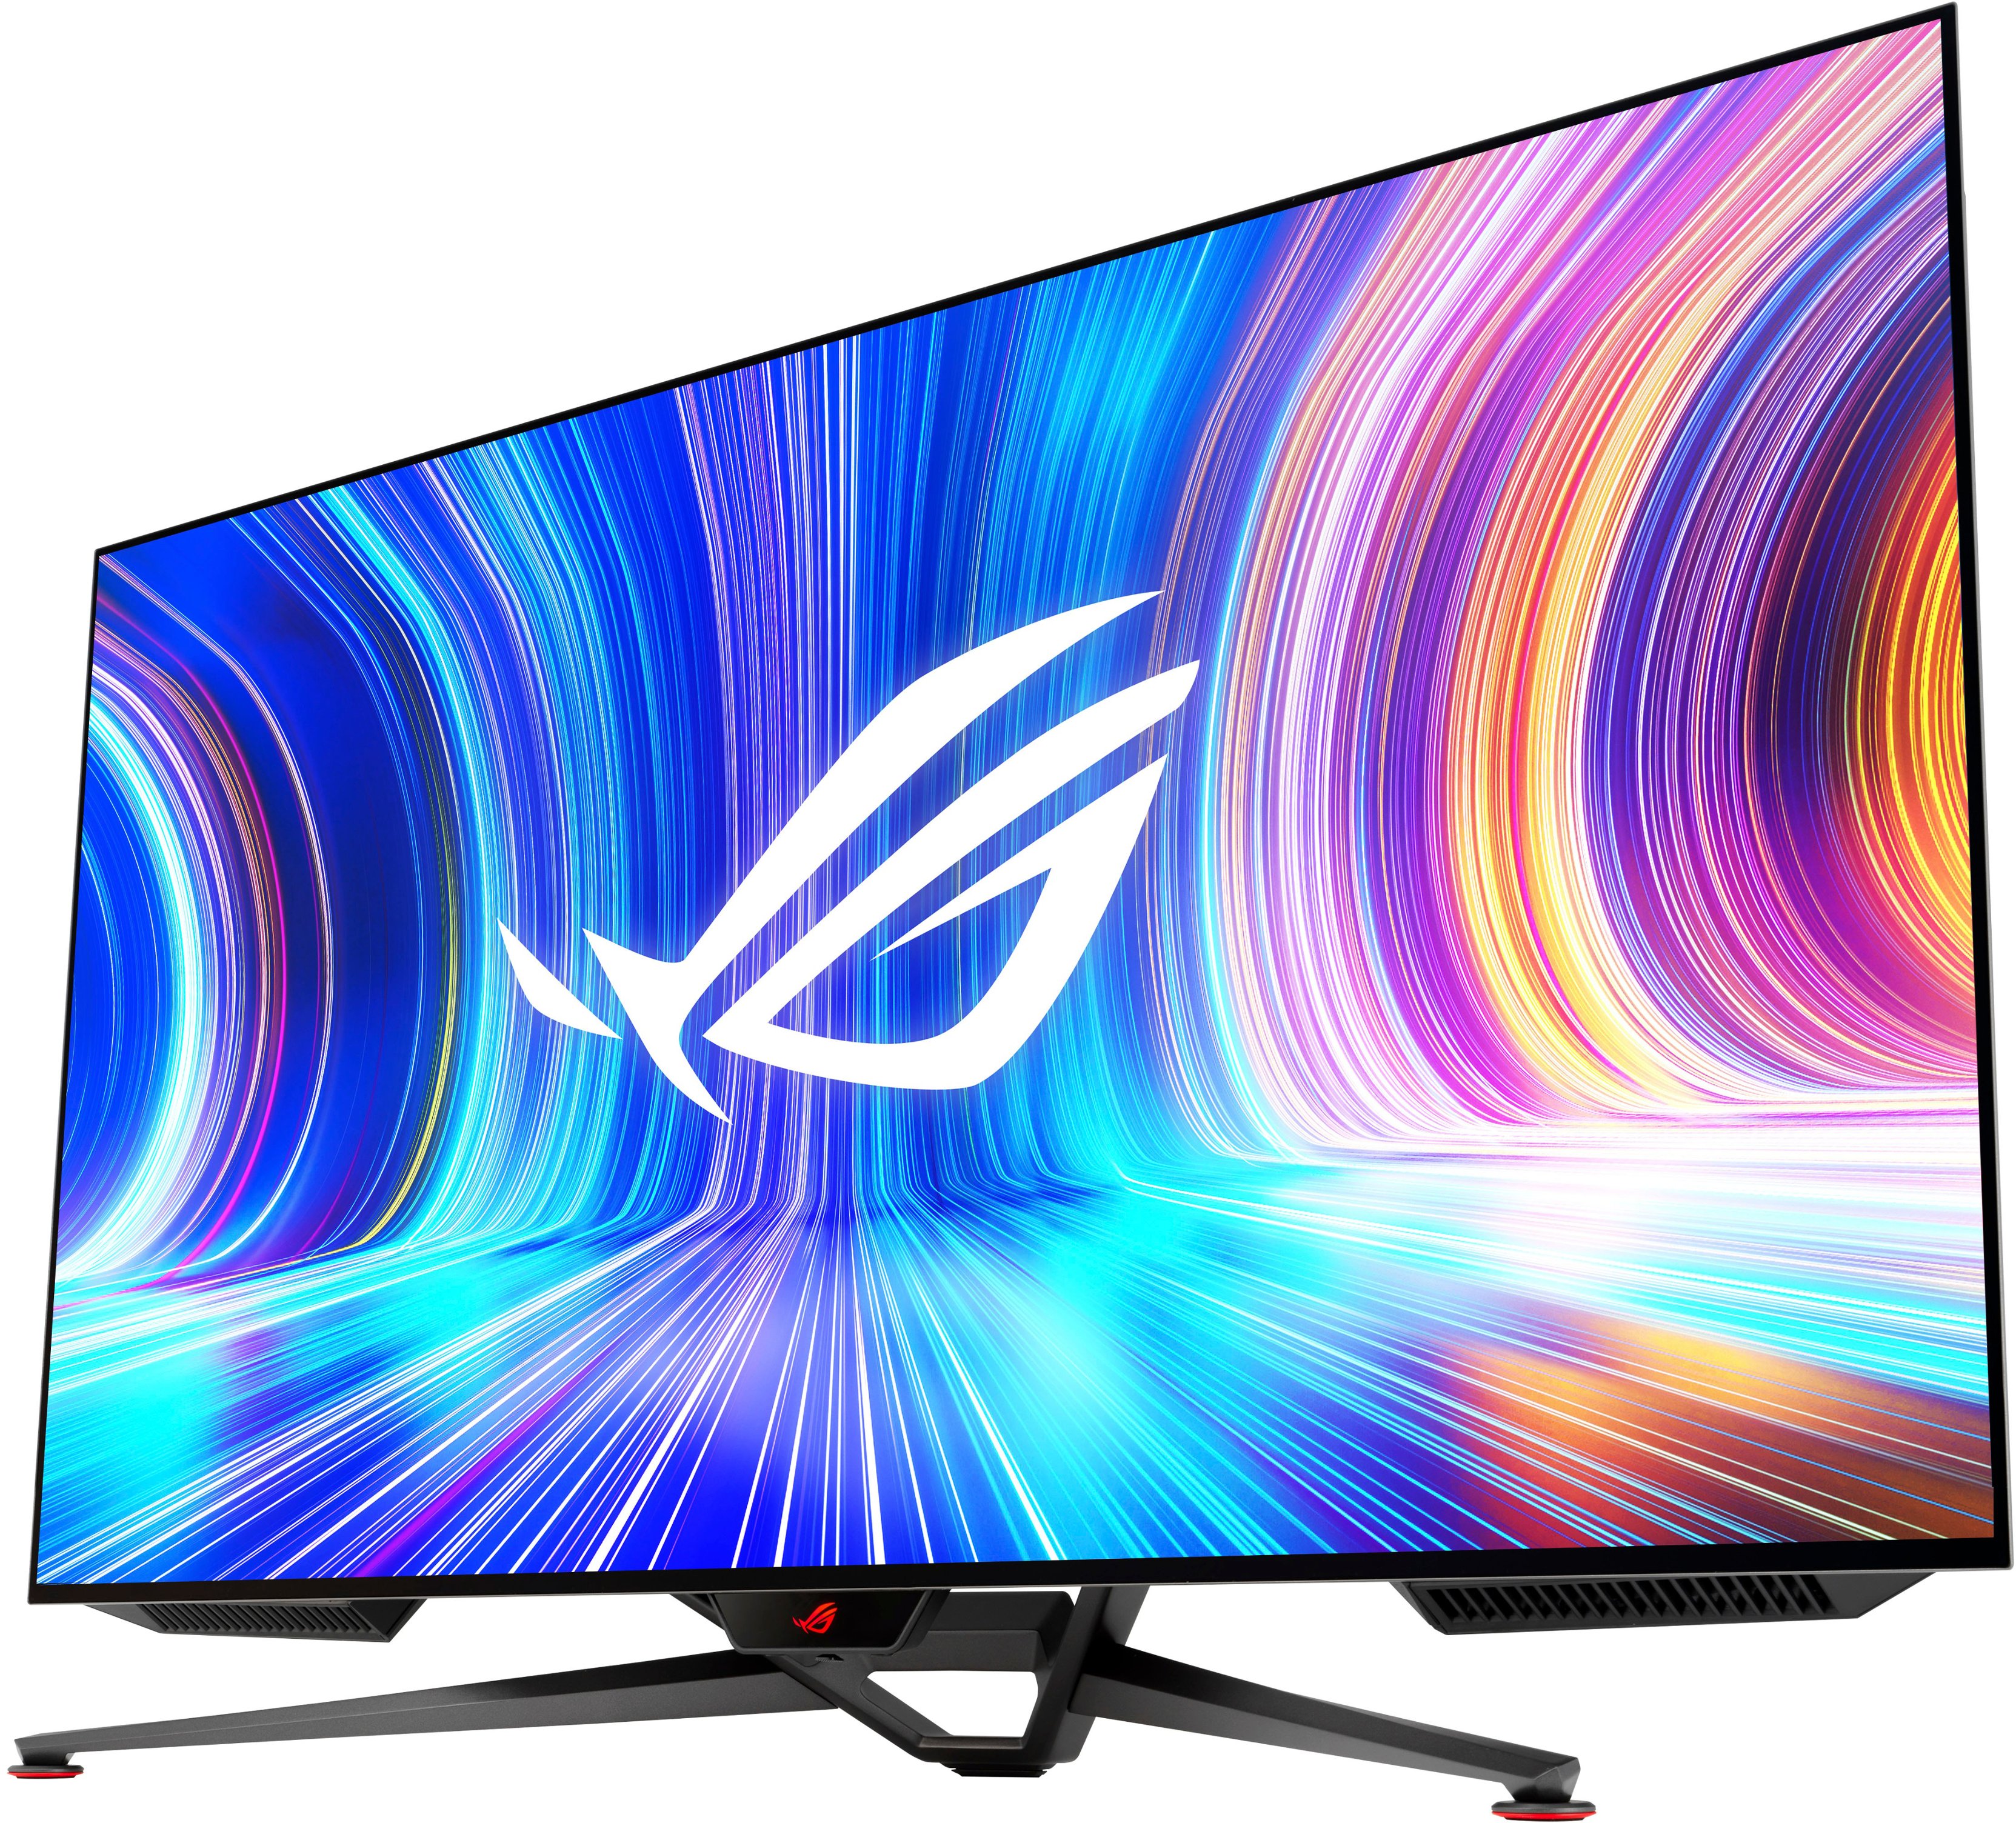 Angle View: ASUS - ROG Swift 41.5" OLED 4K G-SYNC Gaming Monitor with HDR (DisplayPort, USB, HDMI) - Black